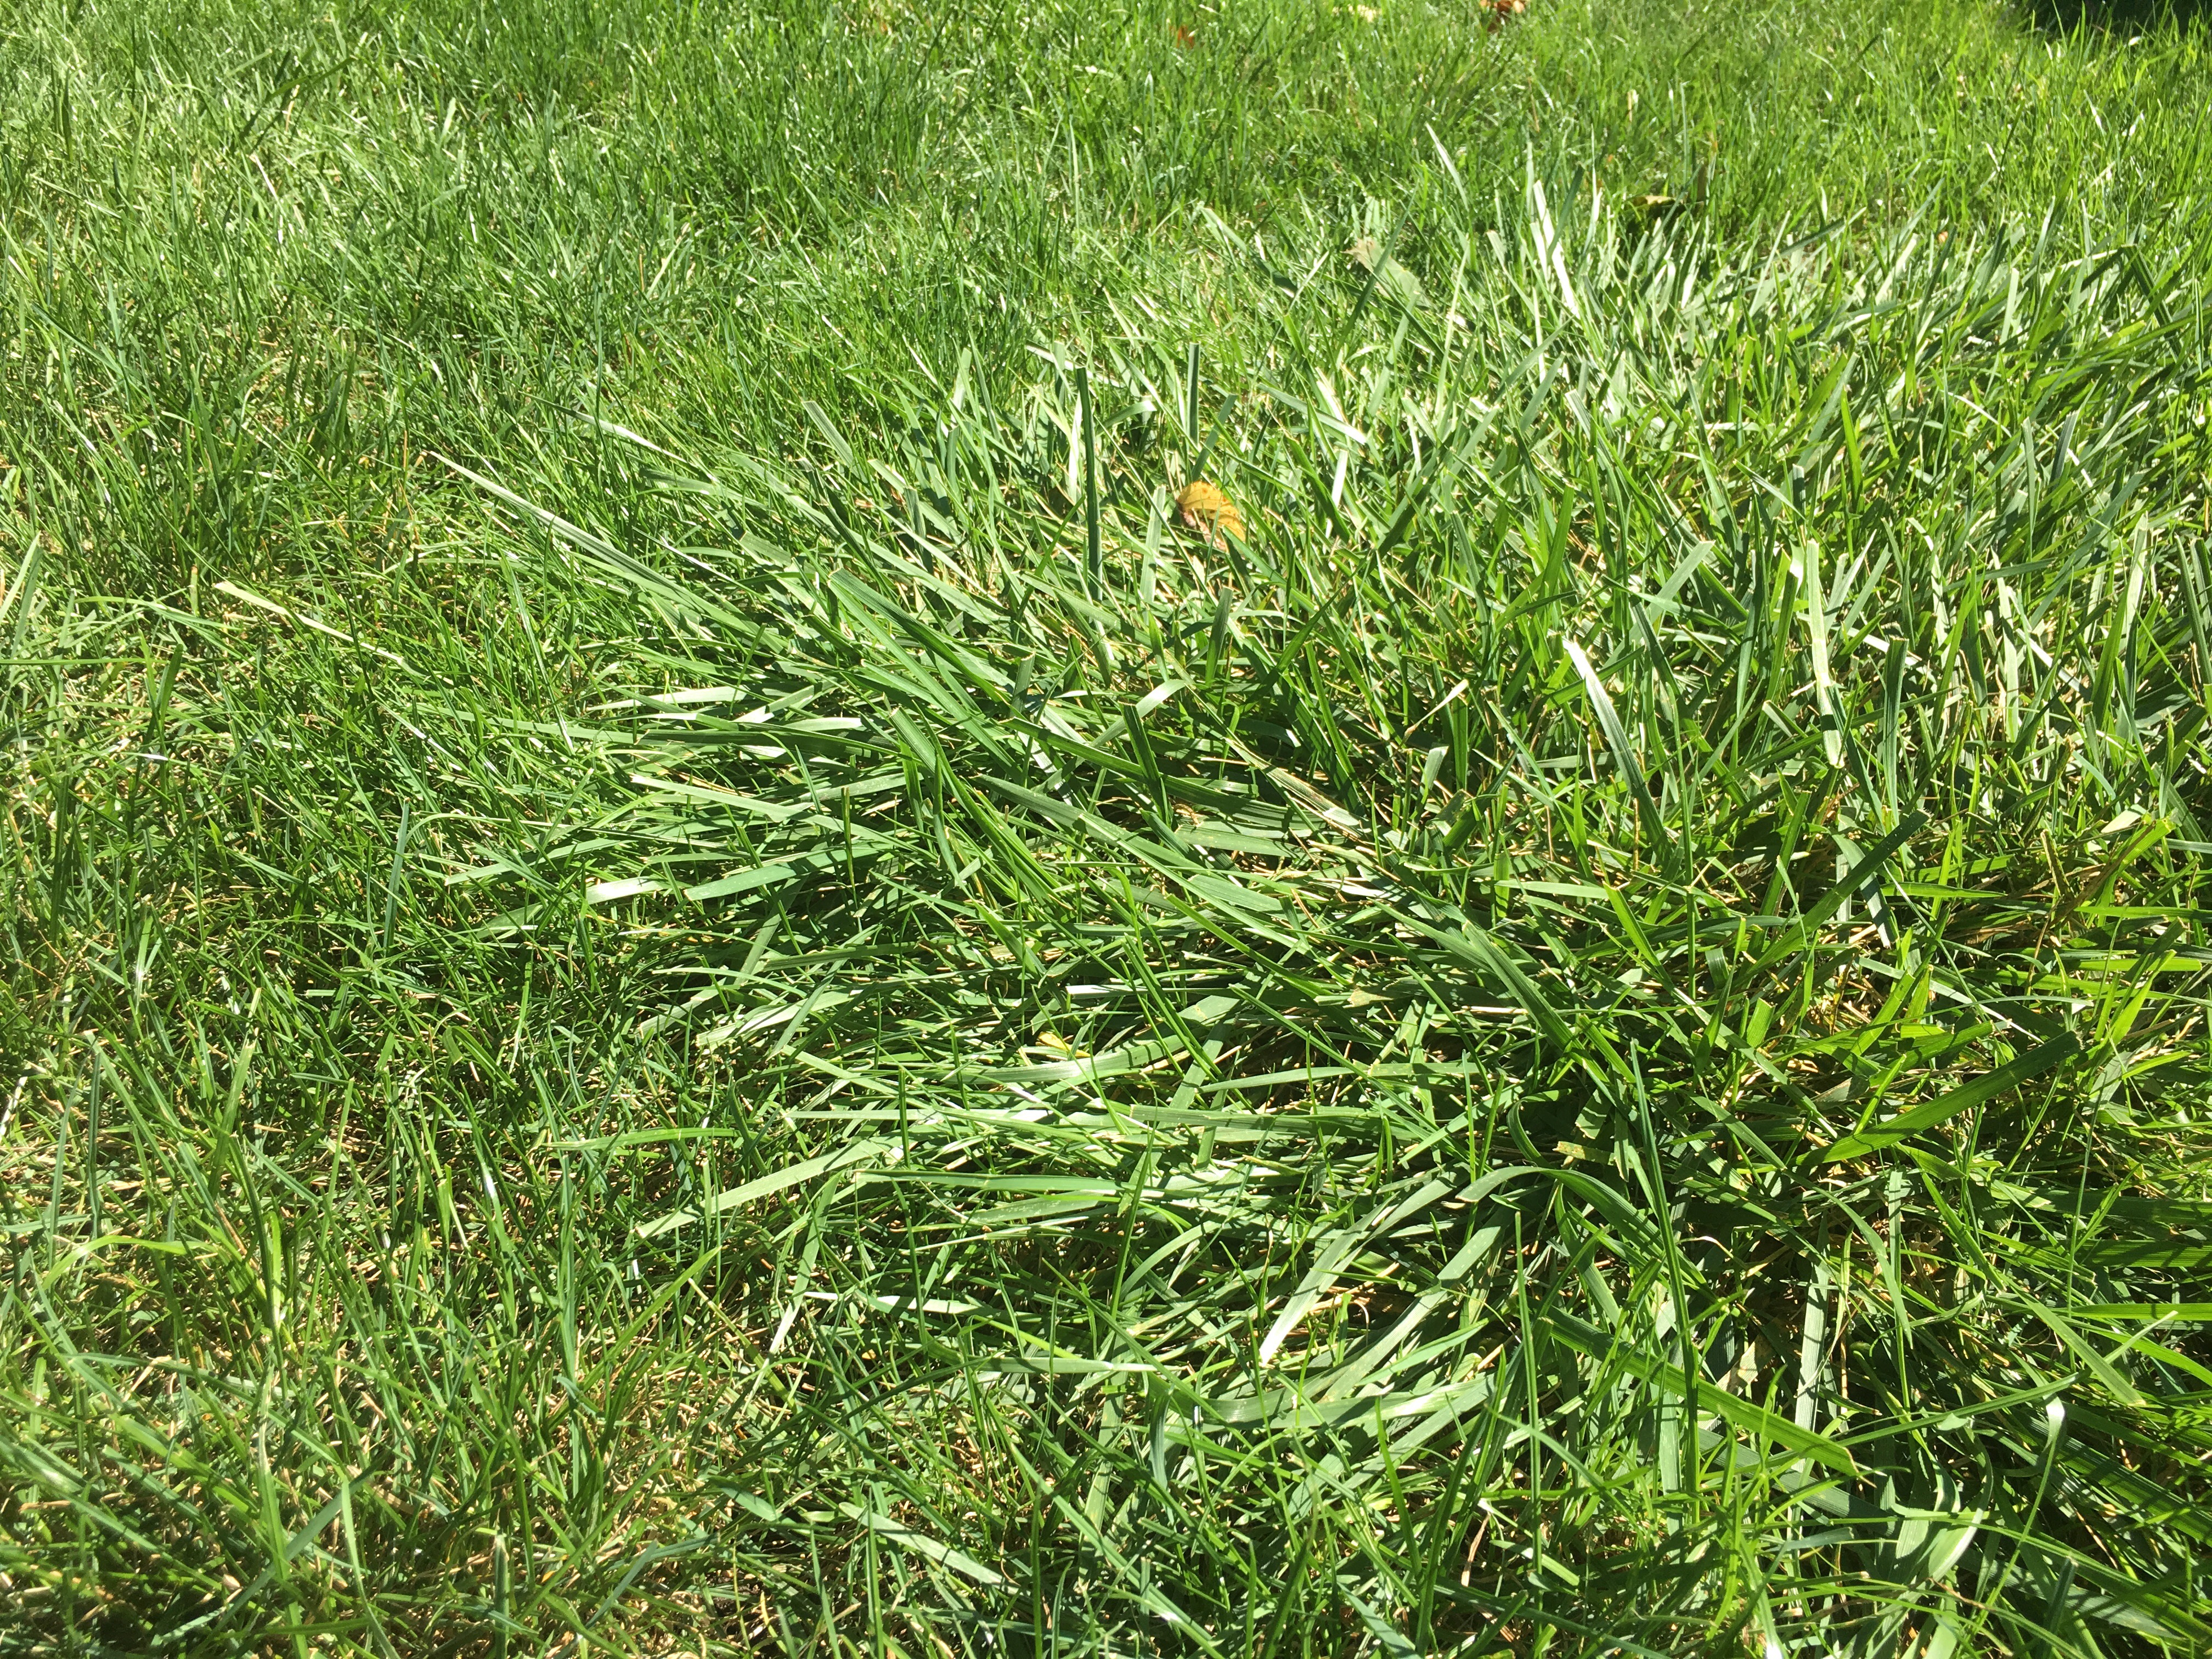 Tall fescue in a home lawn.